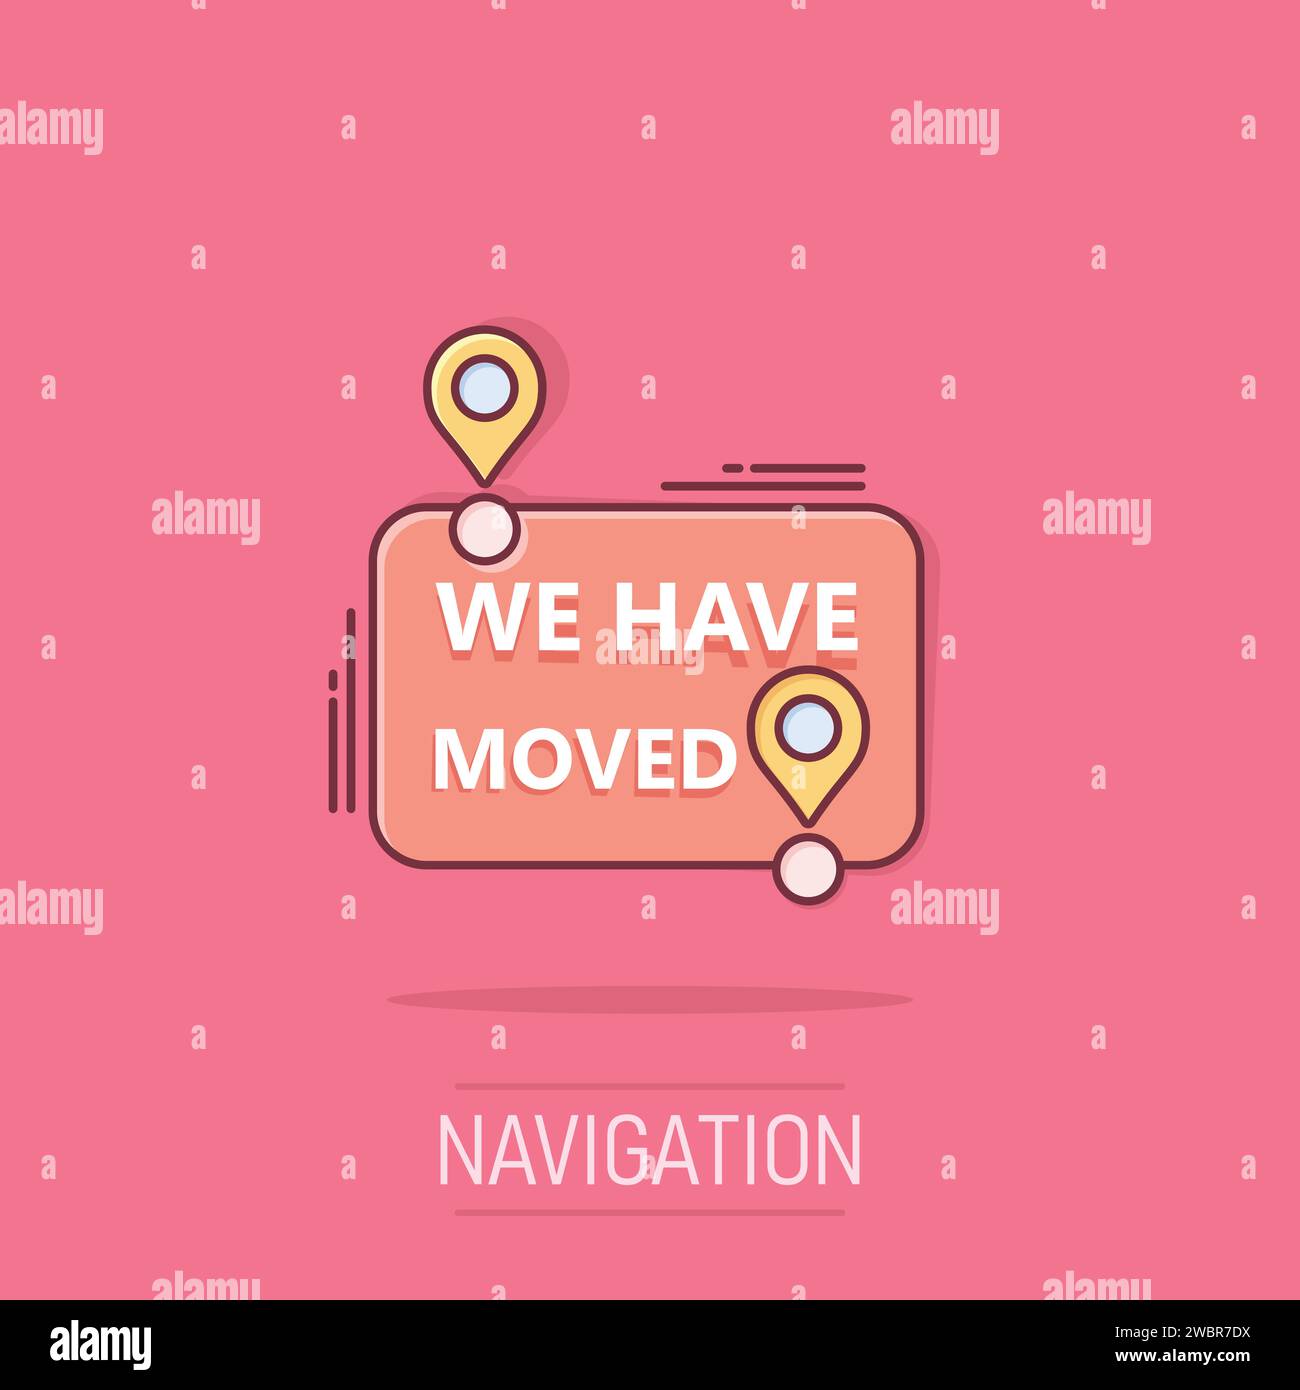 Move location icon in comic style. Pin gps vector cartoon illustration on white isolated background. Navigation business concept splash effect. Stock Vector